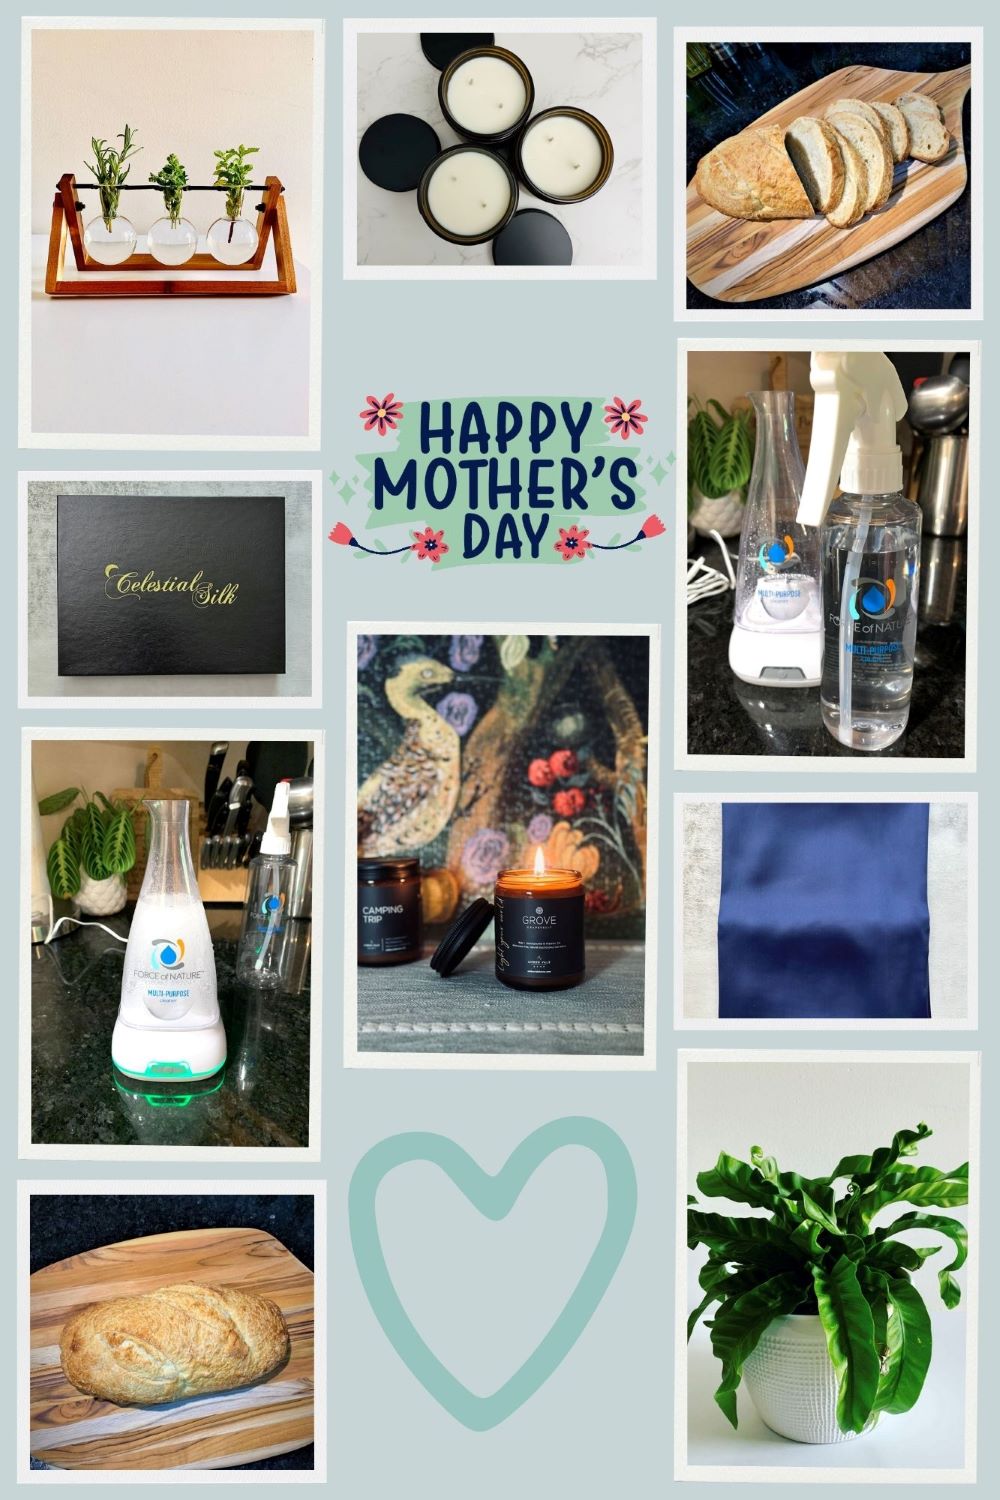 5 Mother's Day Gift Ideas She'll find Delightful